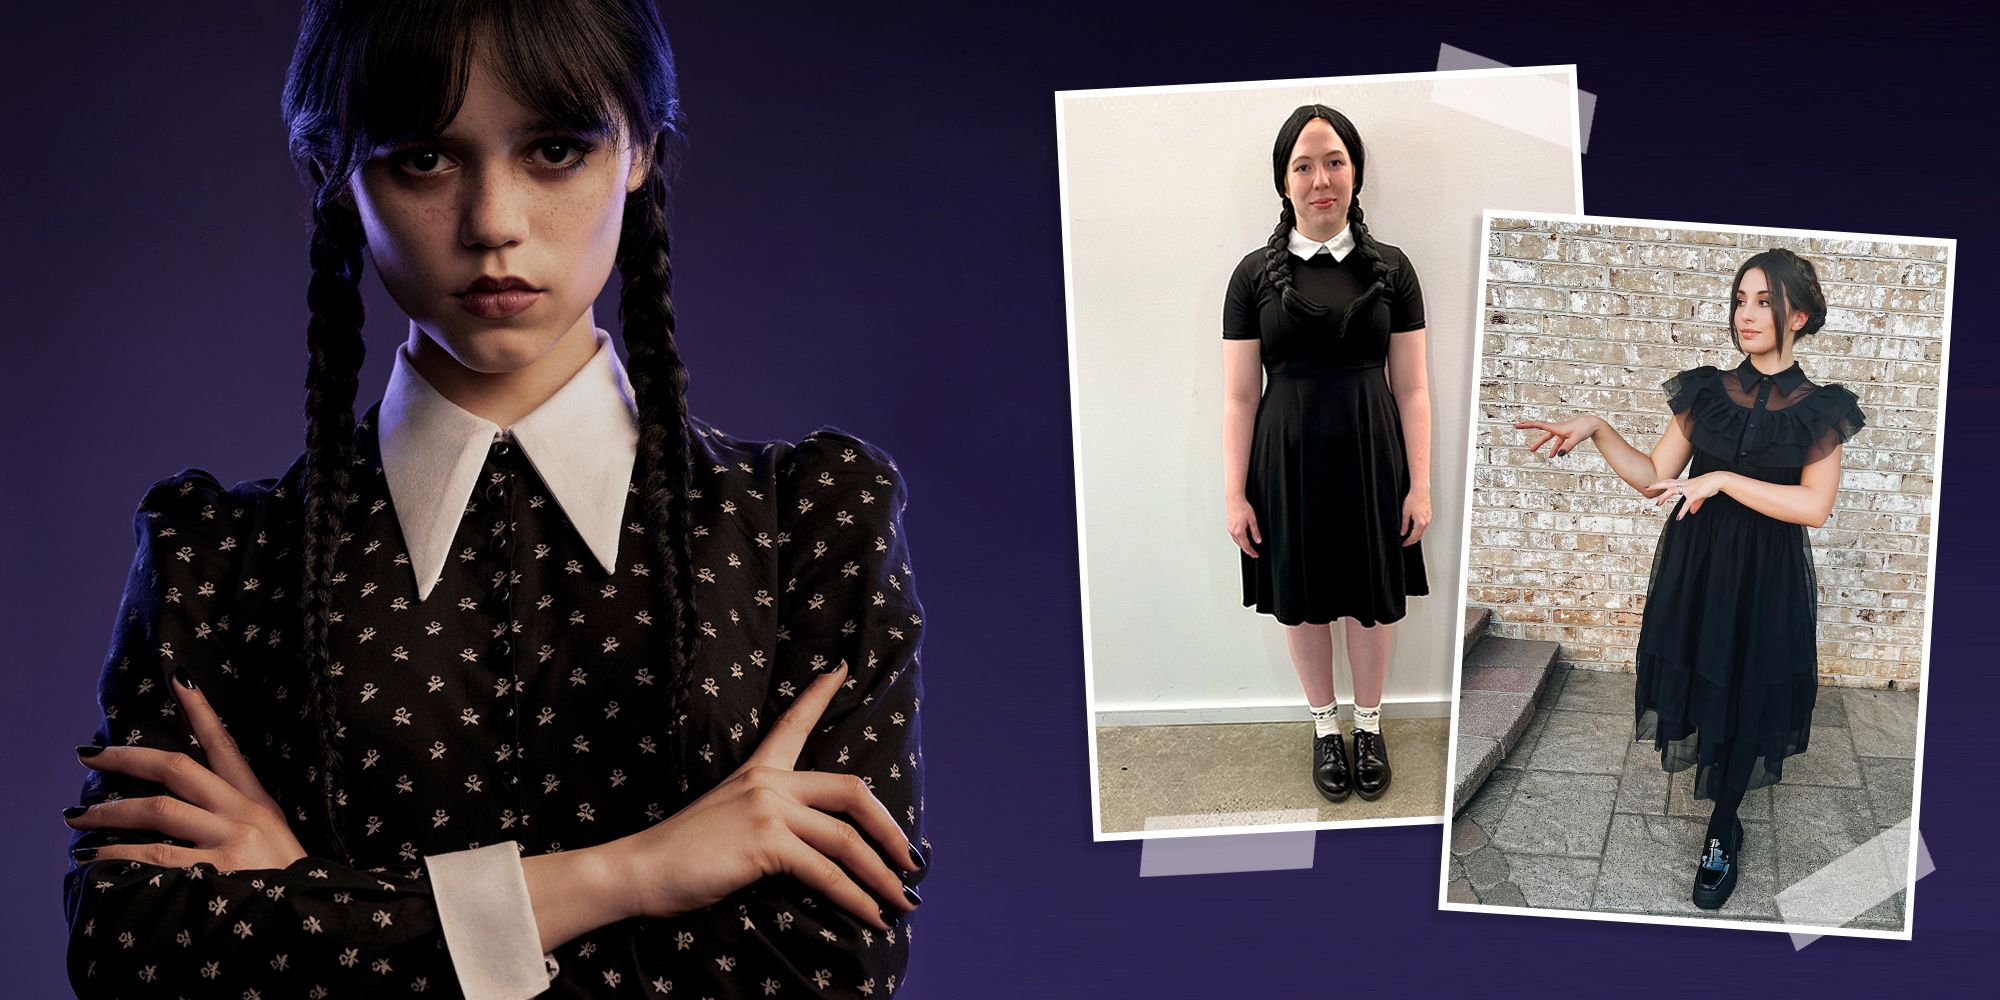 annie abbott recommends Very Adult Wednesday Addams